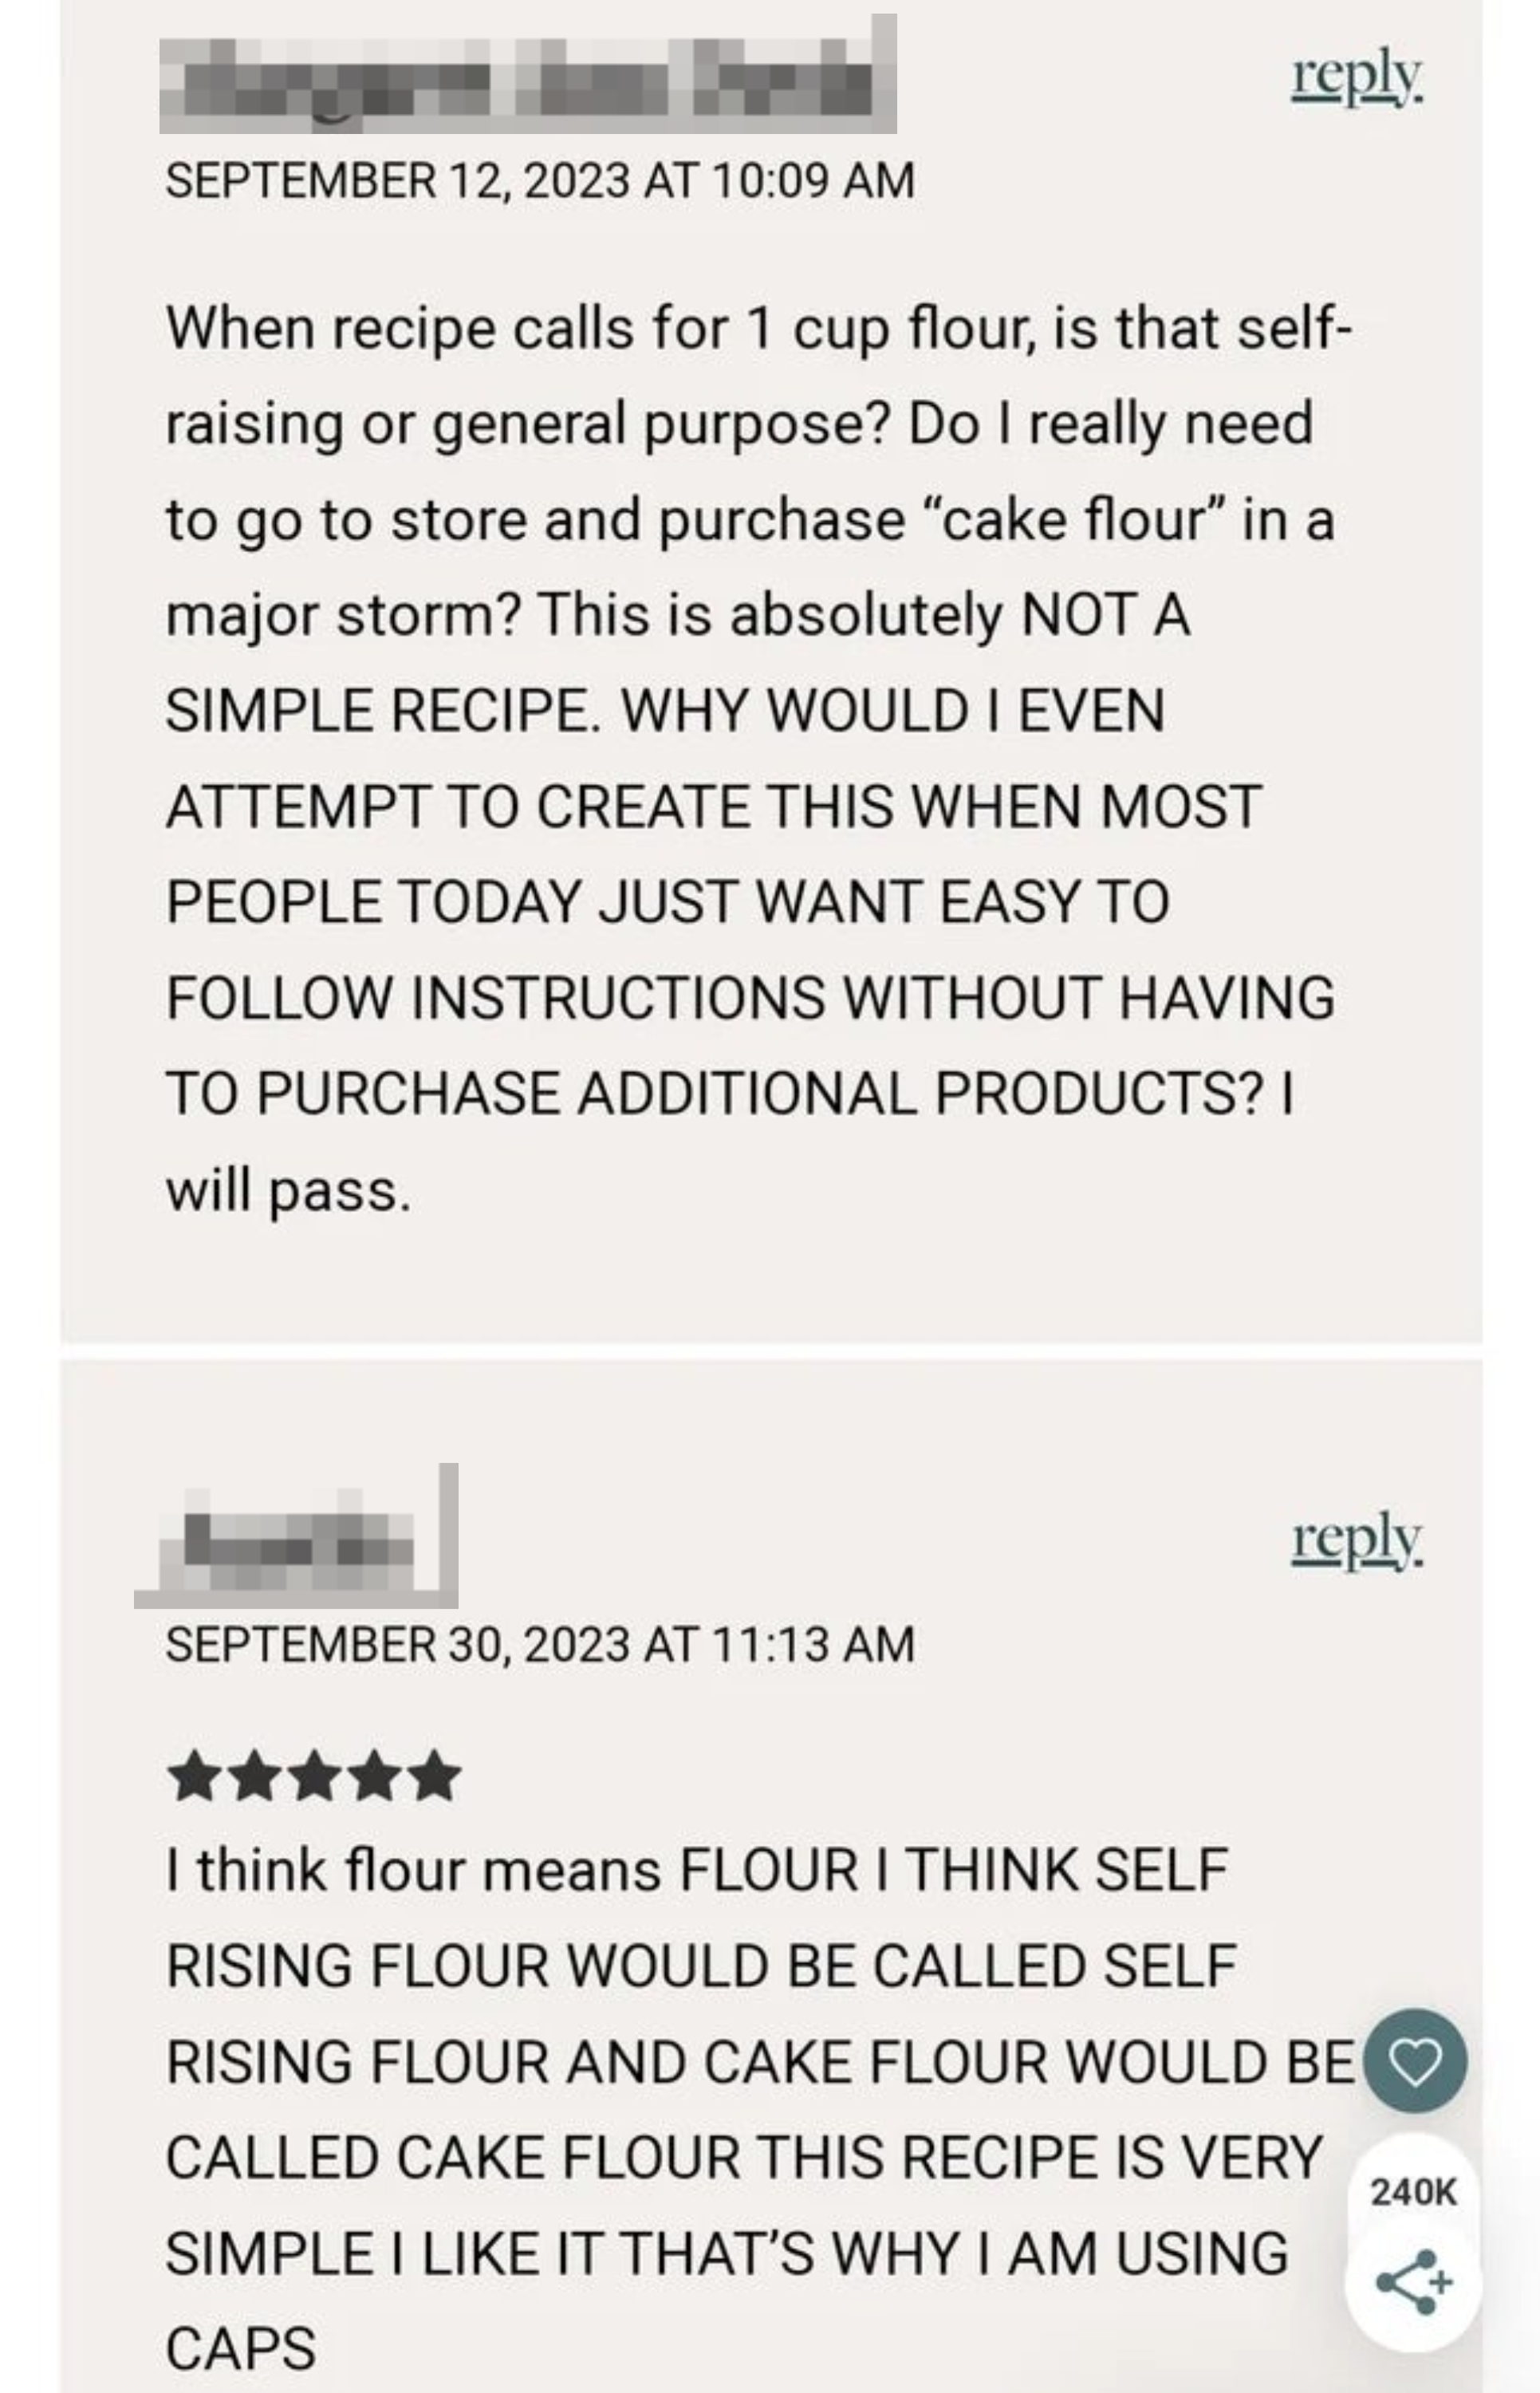 Someone angrily asking what it means when recipe calls for &quot;1 cup flour,&quot; writing in all caps &quot;Do I really need to go to the store and purchase cake flour in a major storm?&quot;